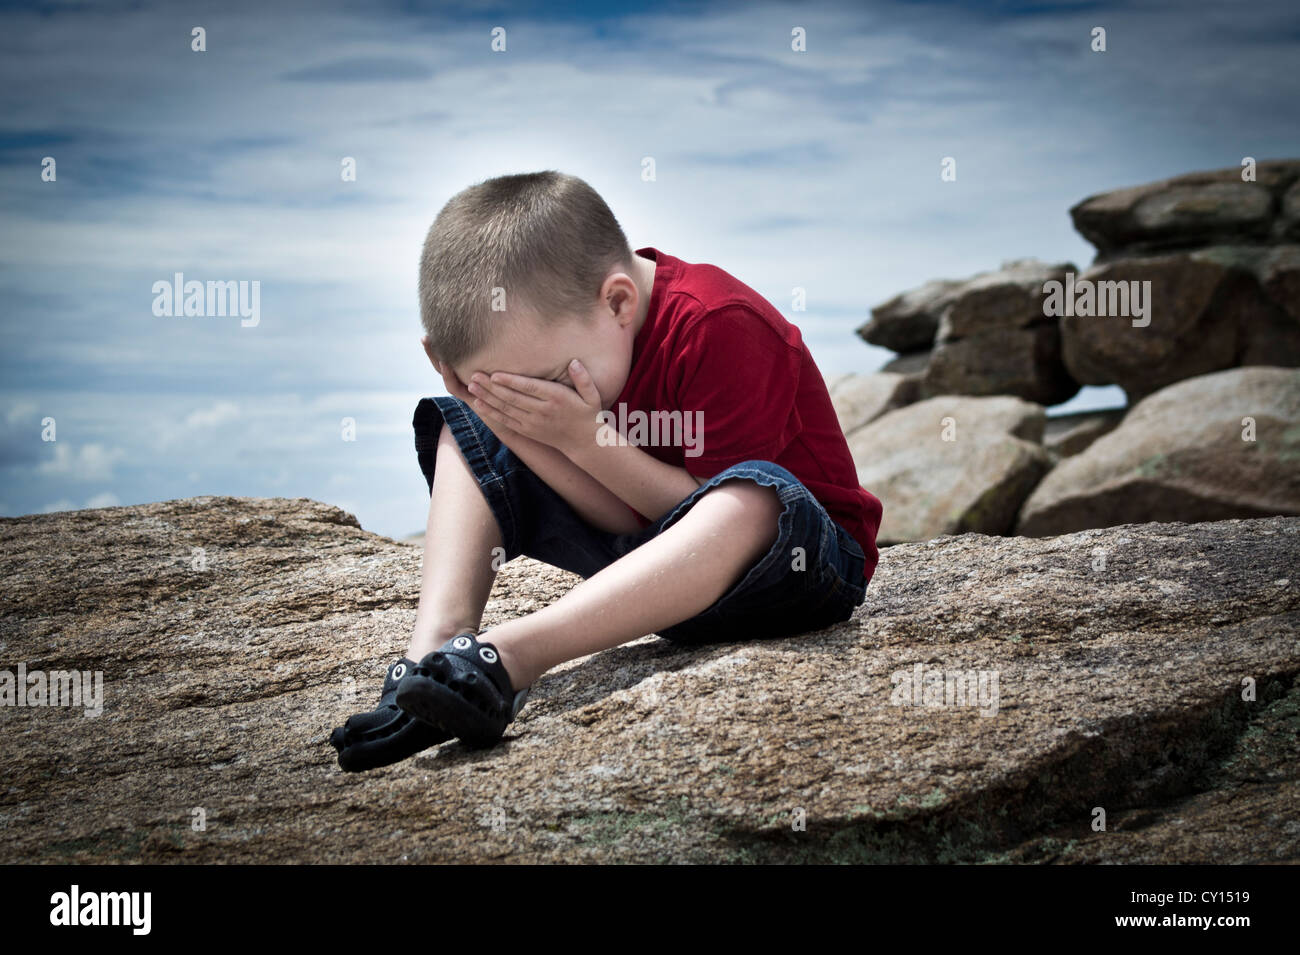 A five-year-old boy with autism feeling overwhelmed by his surroundings hides his face in his hands. Stock Photo